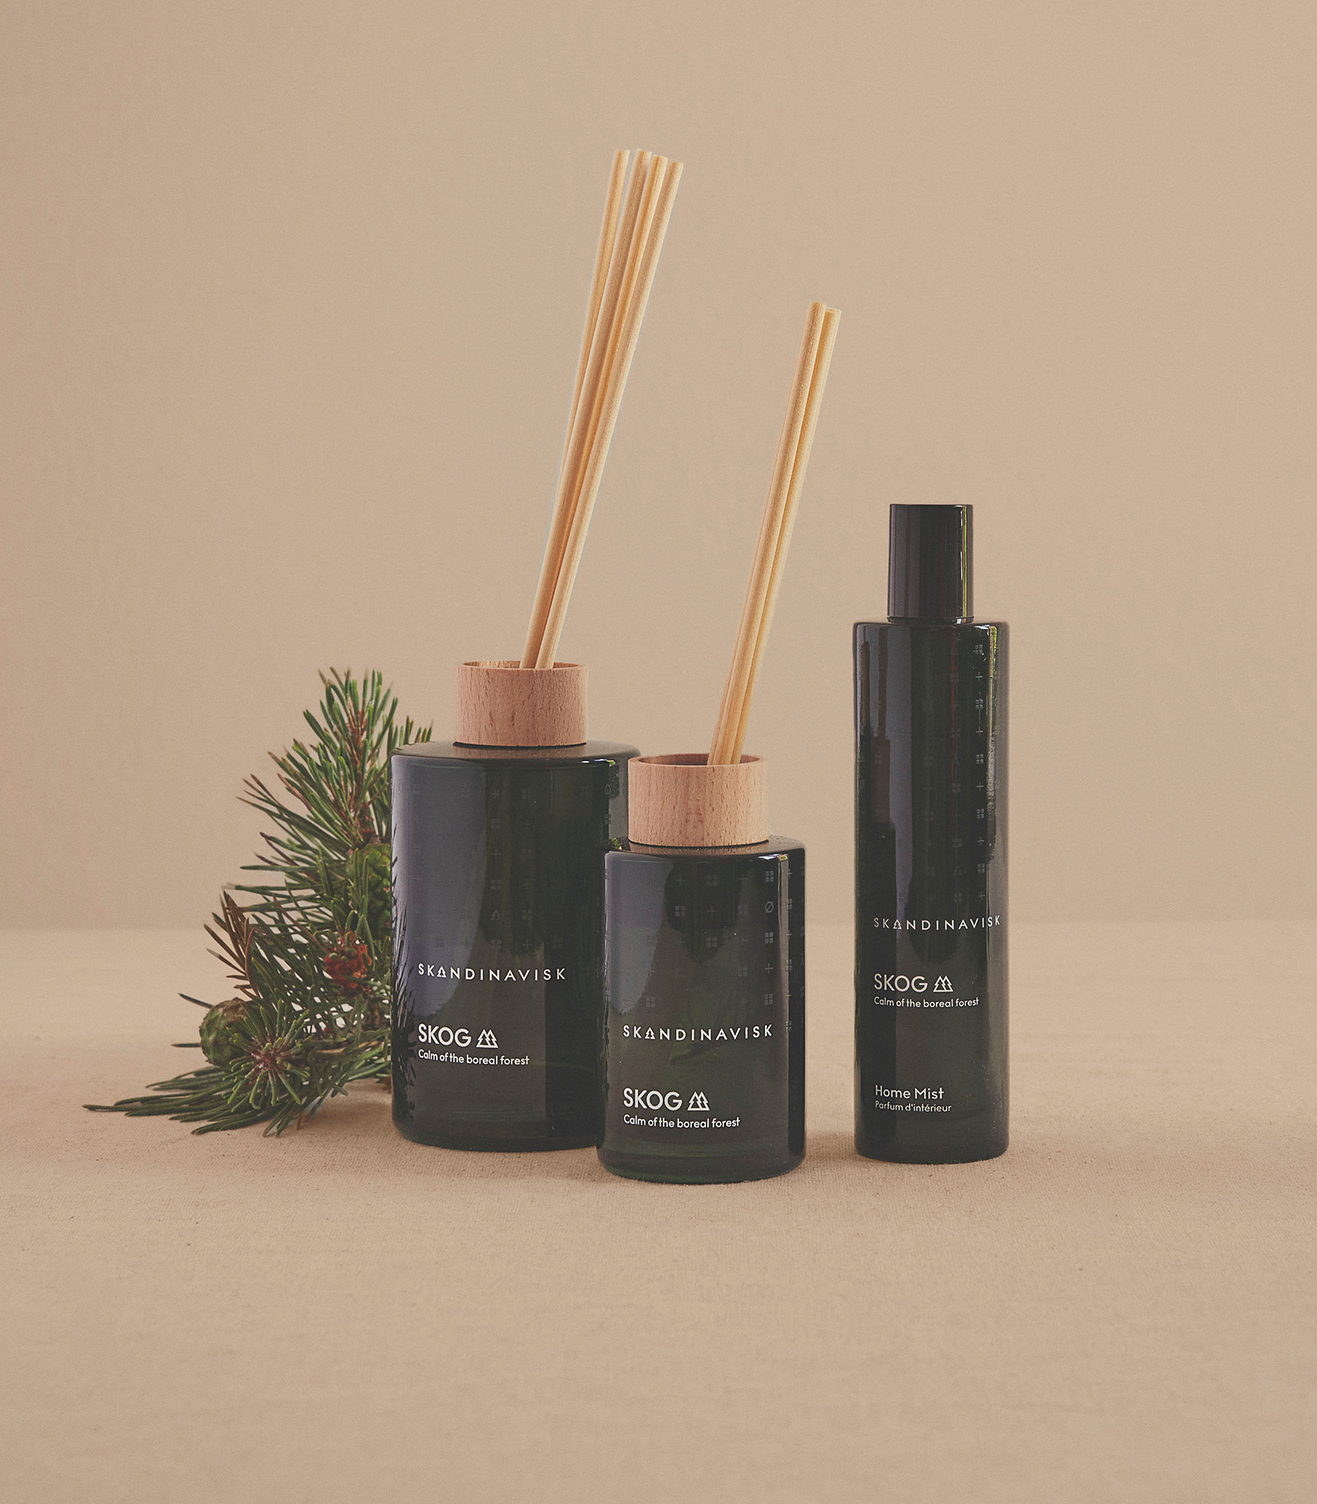 Home fragrance collection in Skog scent from Skandinavisk with the scent of the Nordic forests, in luxury dark green glass,  all natural and vegan scent.